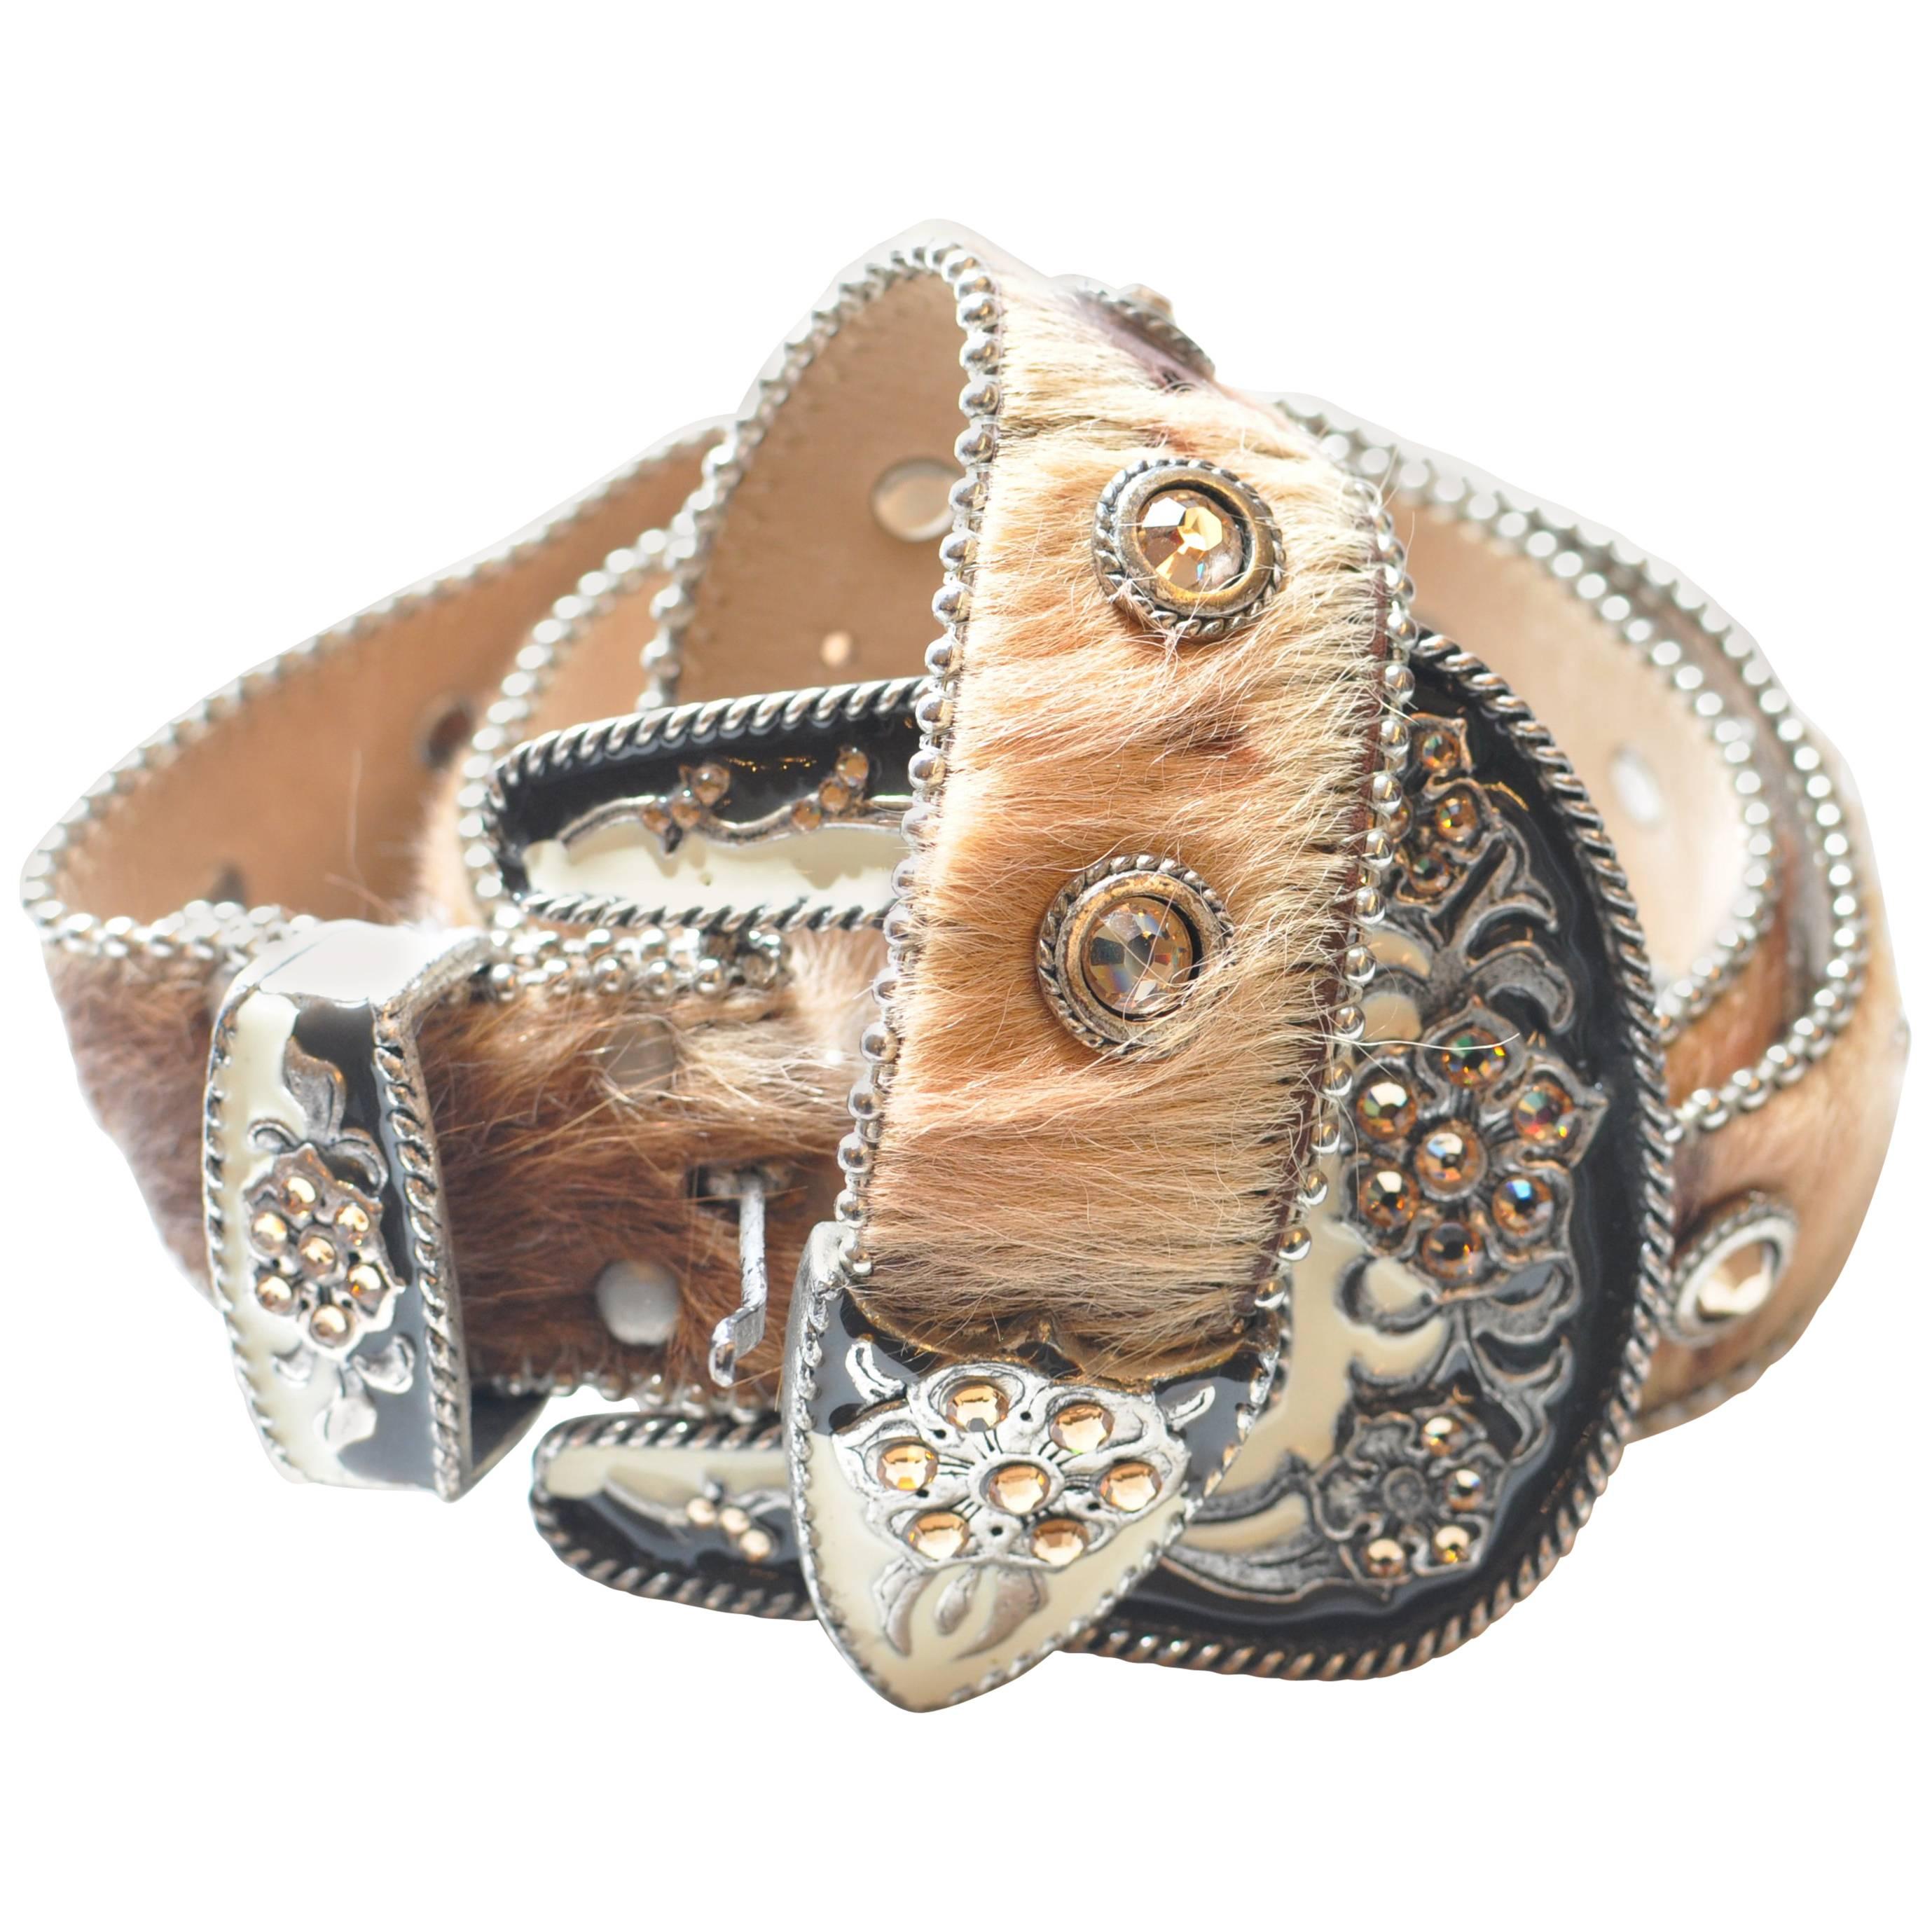 Leatherock Western Pony Hair Belt with Crystals 34"